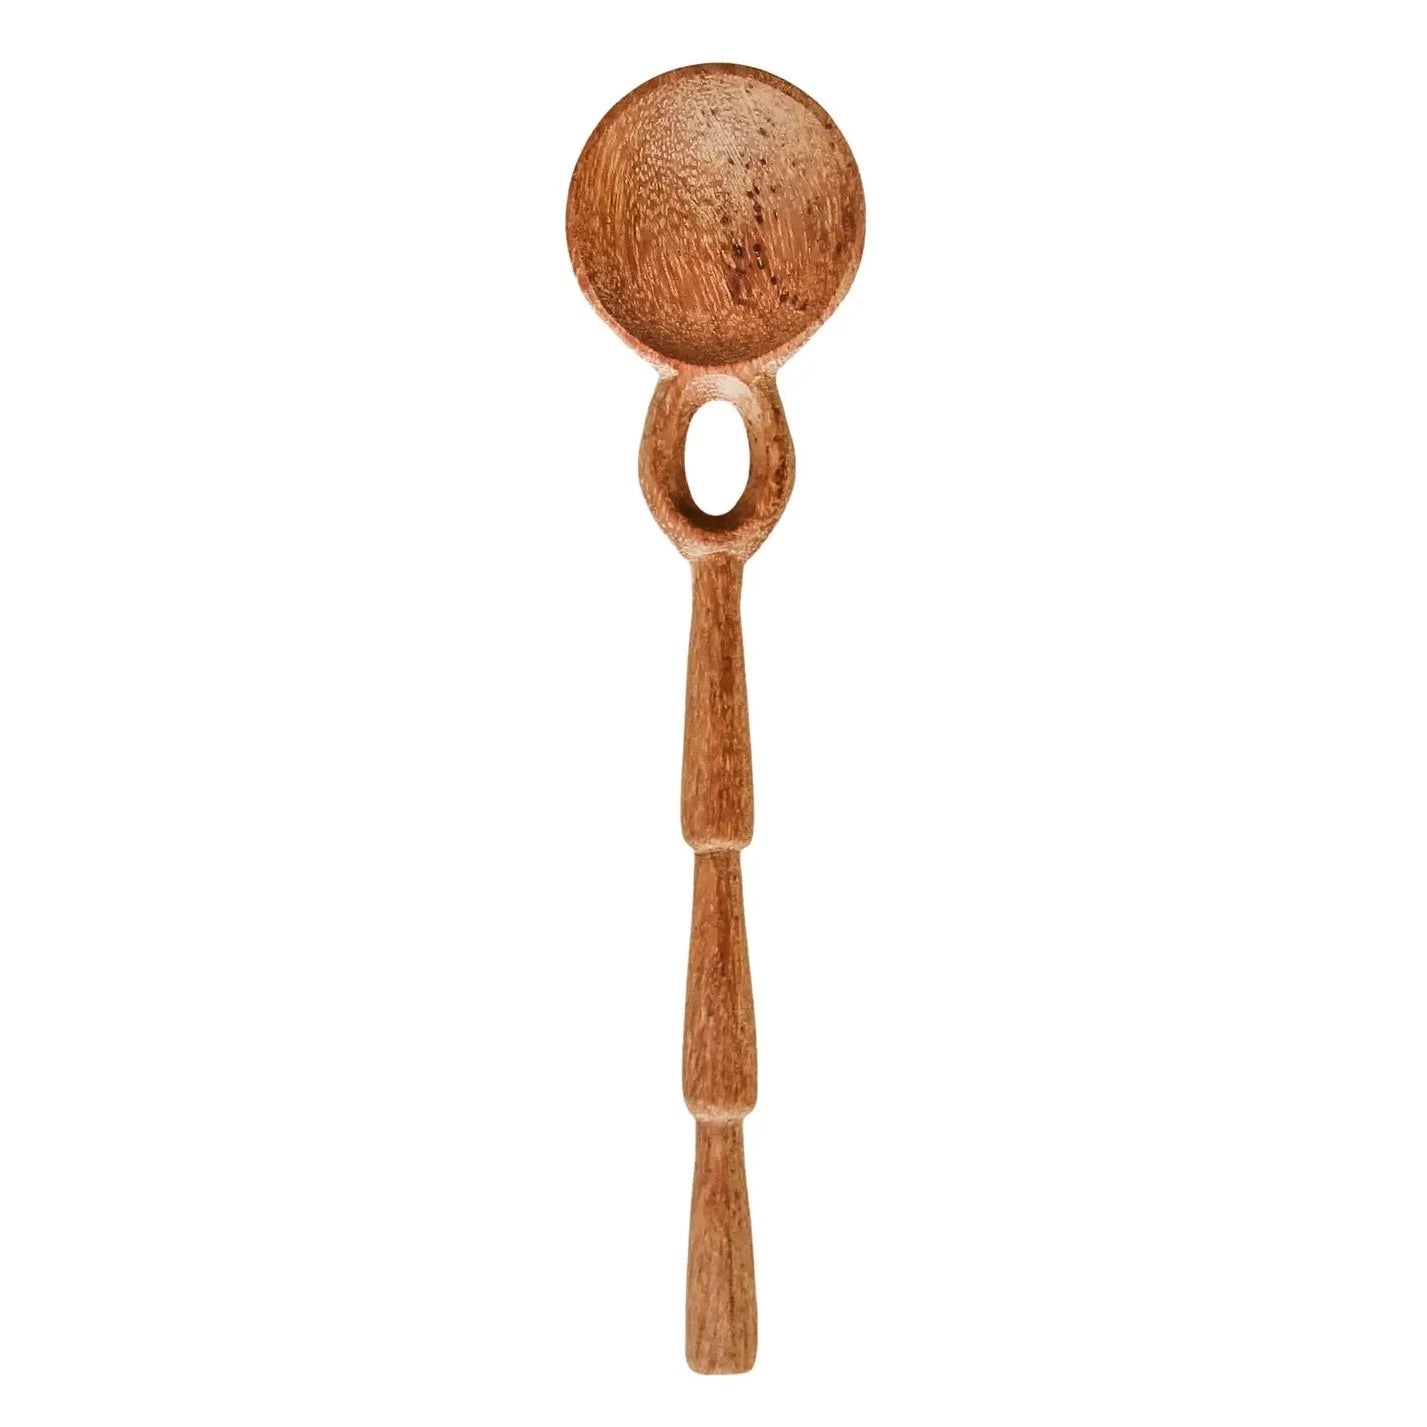 194 Craft House | Asparagus Handle Wooden Spoon